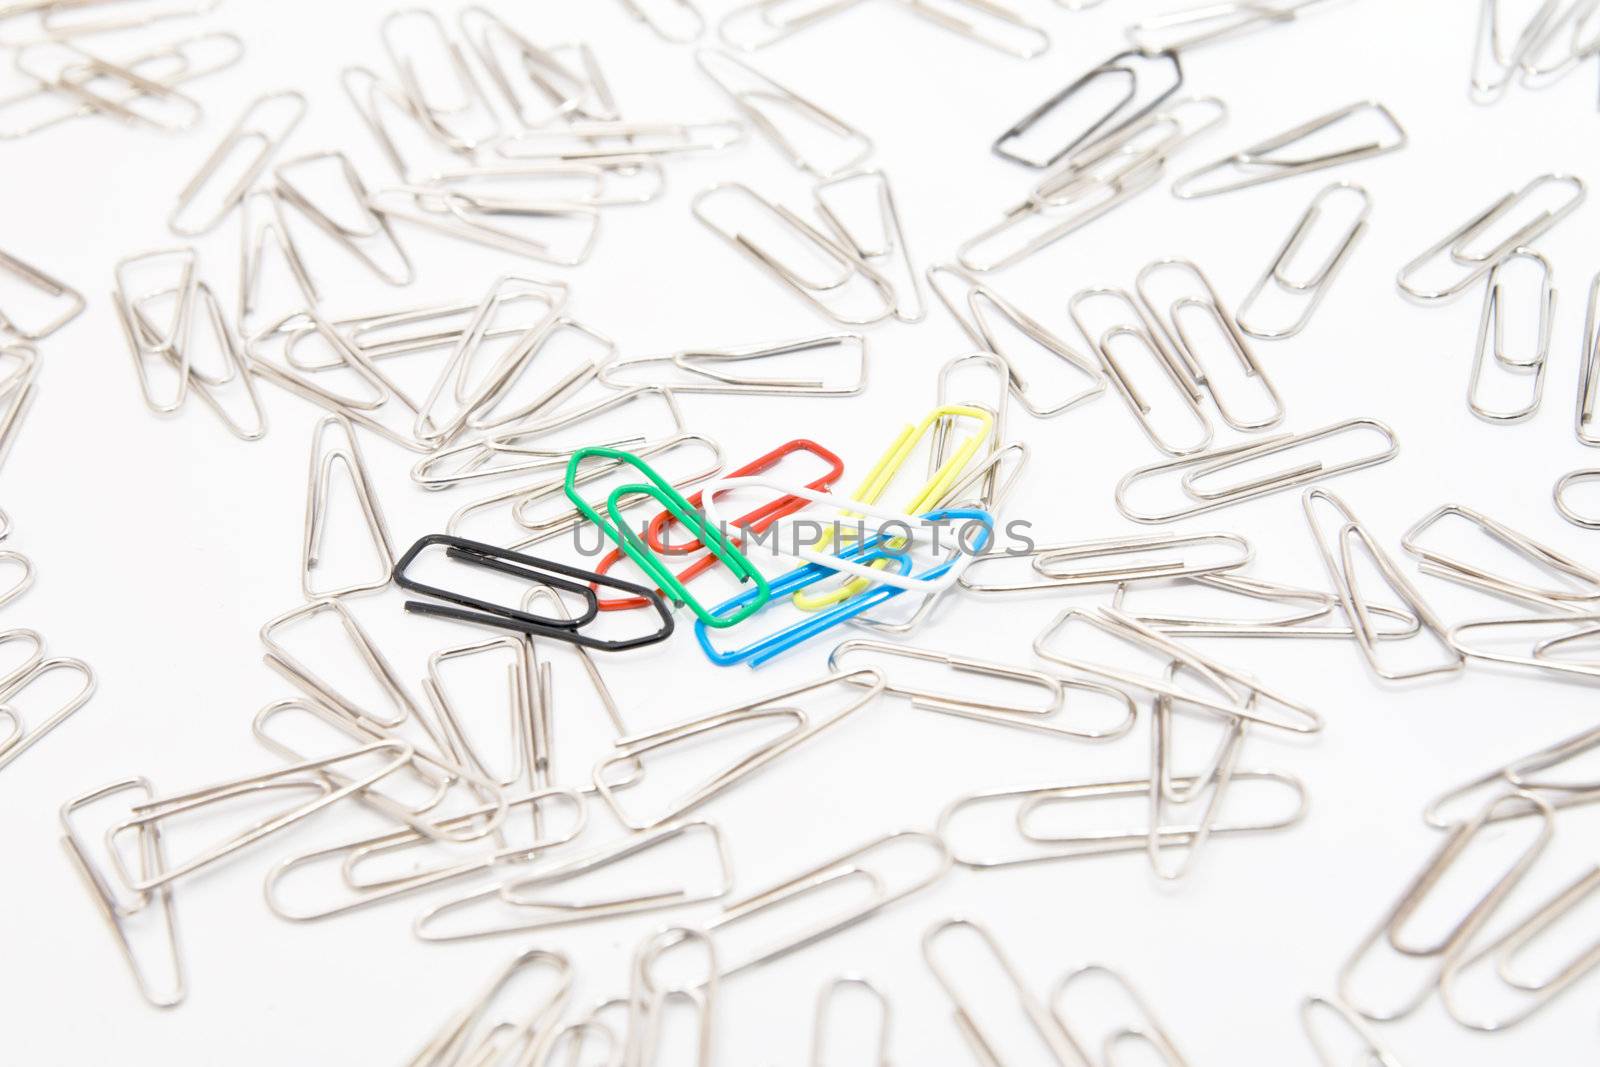 Five colourful paperclips among many steel grey paperclips on white background